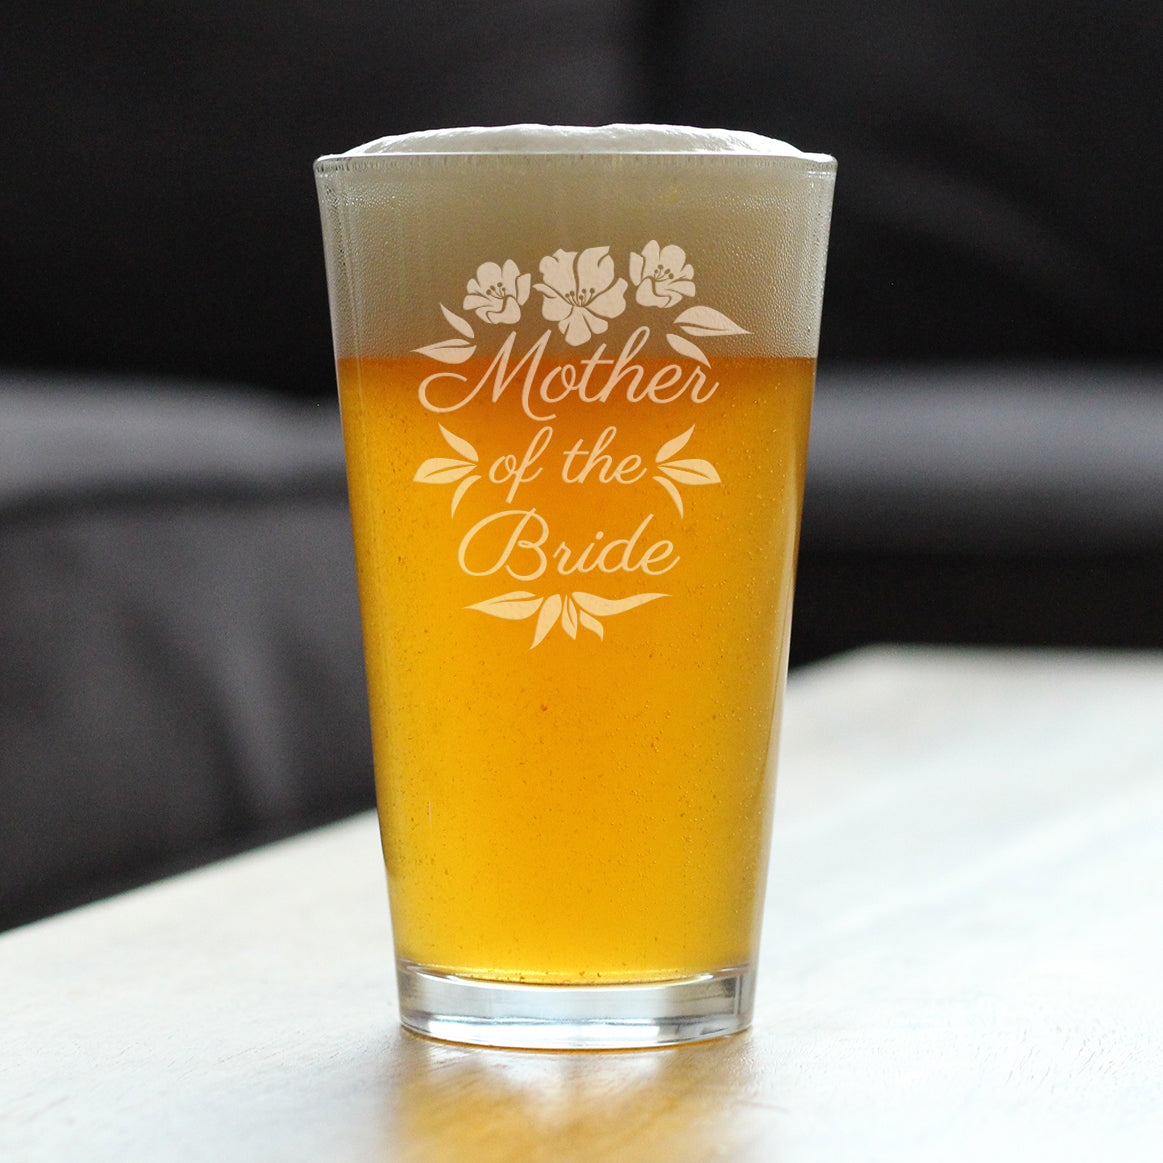 Mother of the Bride Pint Glass - Unique Wedding Gift for Soon to Be Mother-in-Law - Cute Engraved Wedding Cup Gift